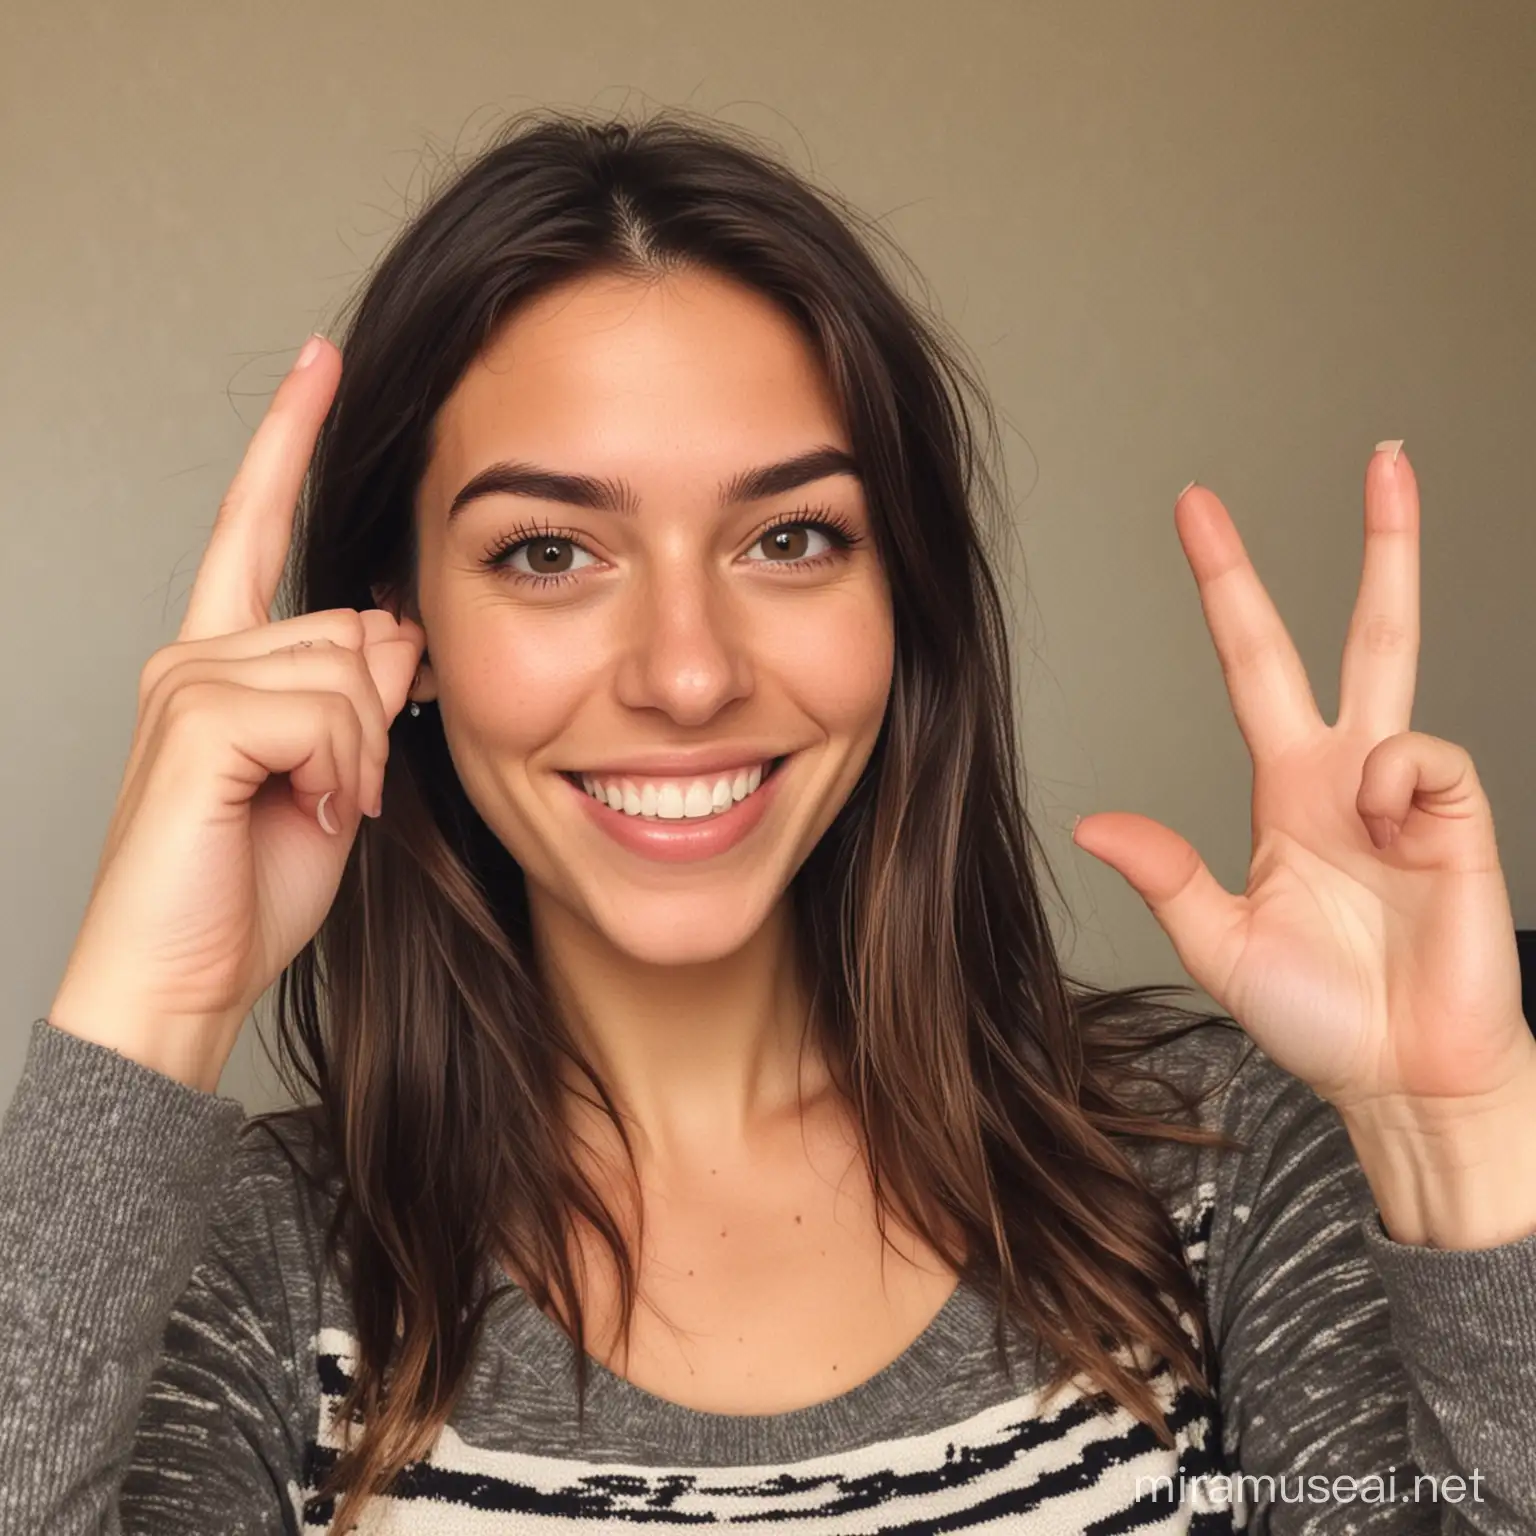 Cheerful 27YearOld Woman Smiling with Three Fingers